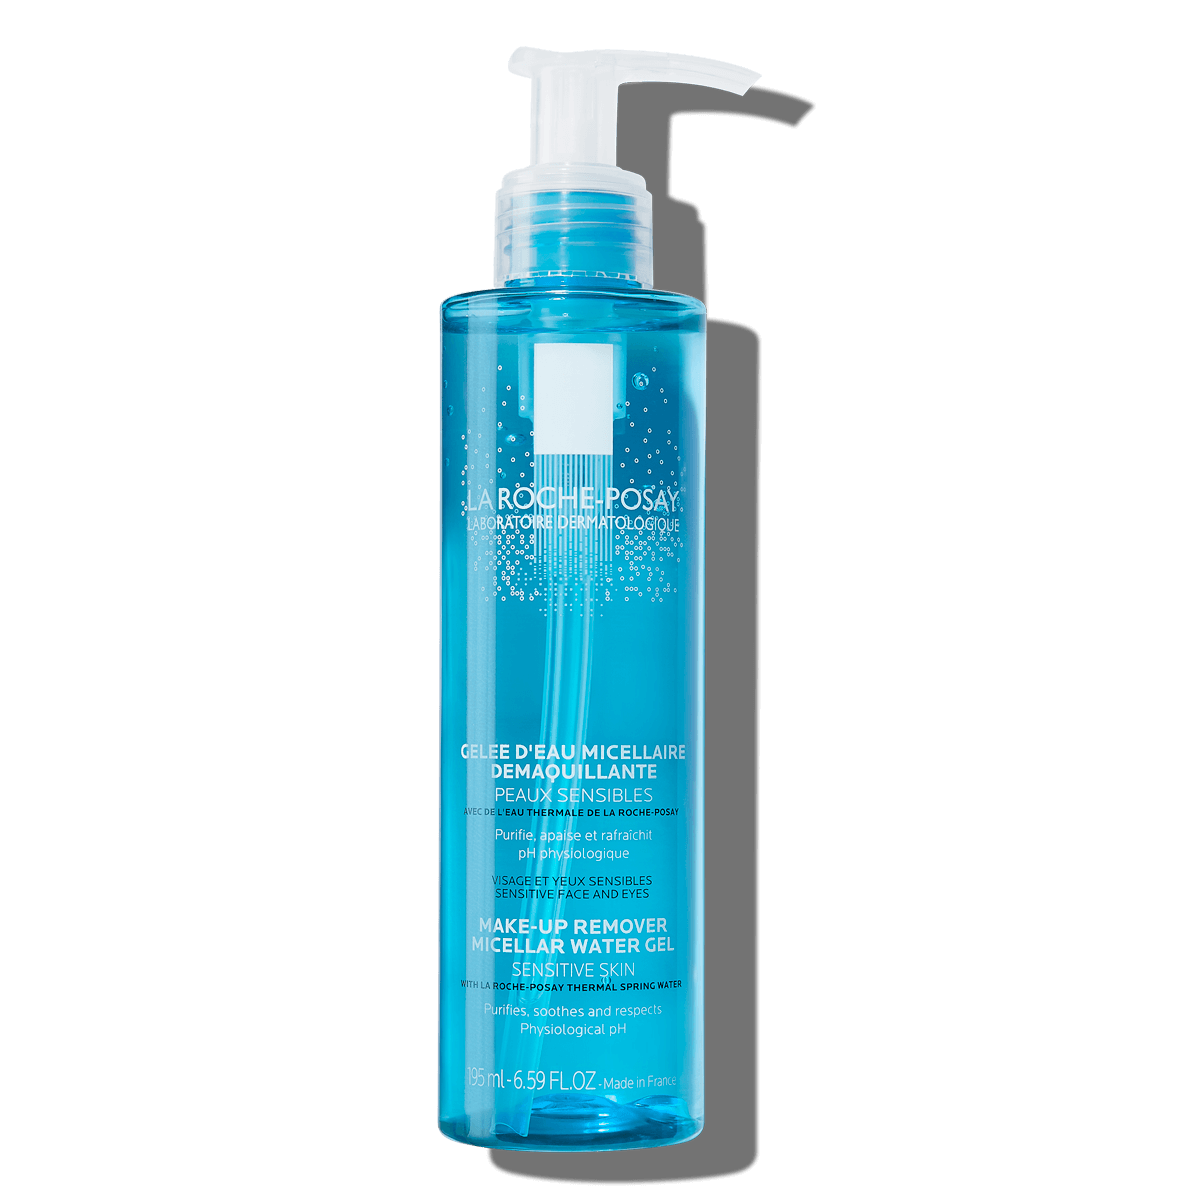 La Roche Posay ProductPage Make Up Remover Micellar Water Gel 195ml 33